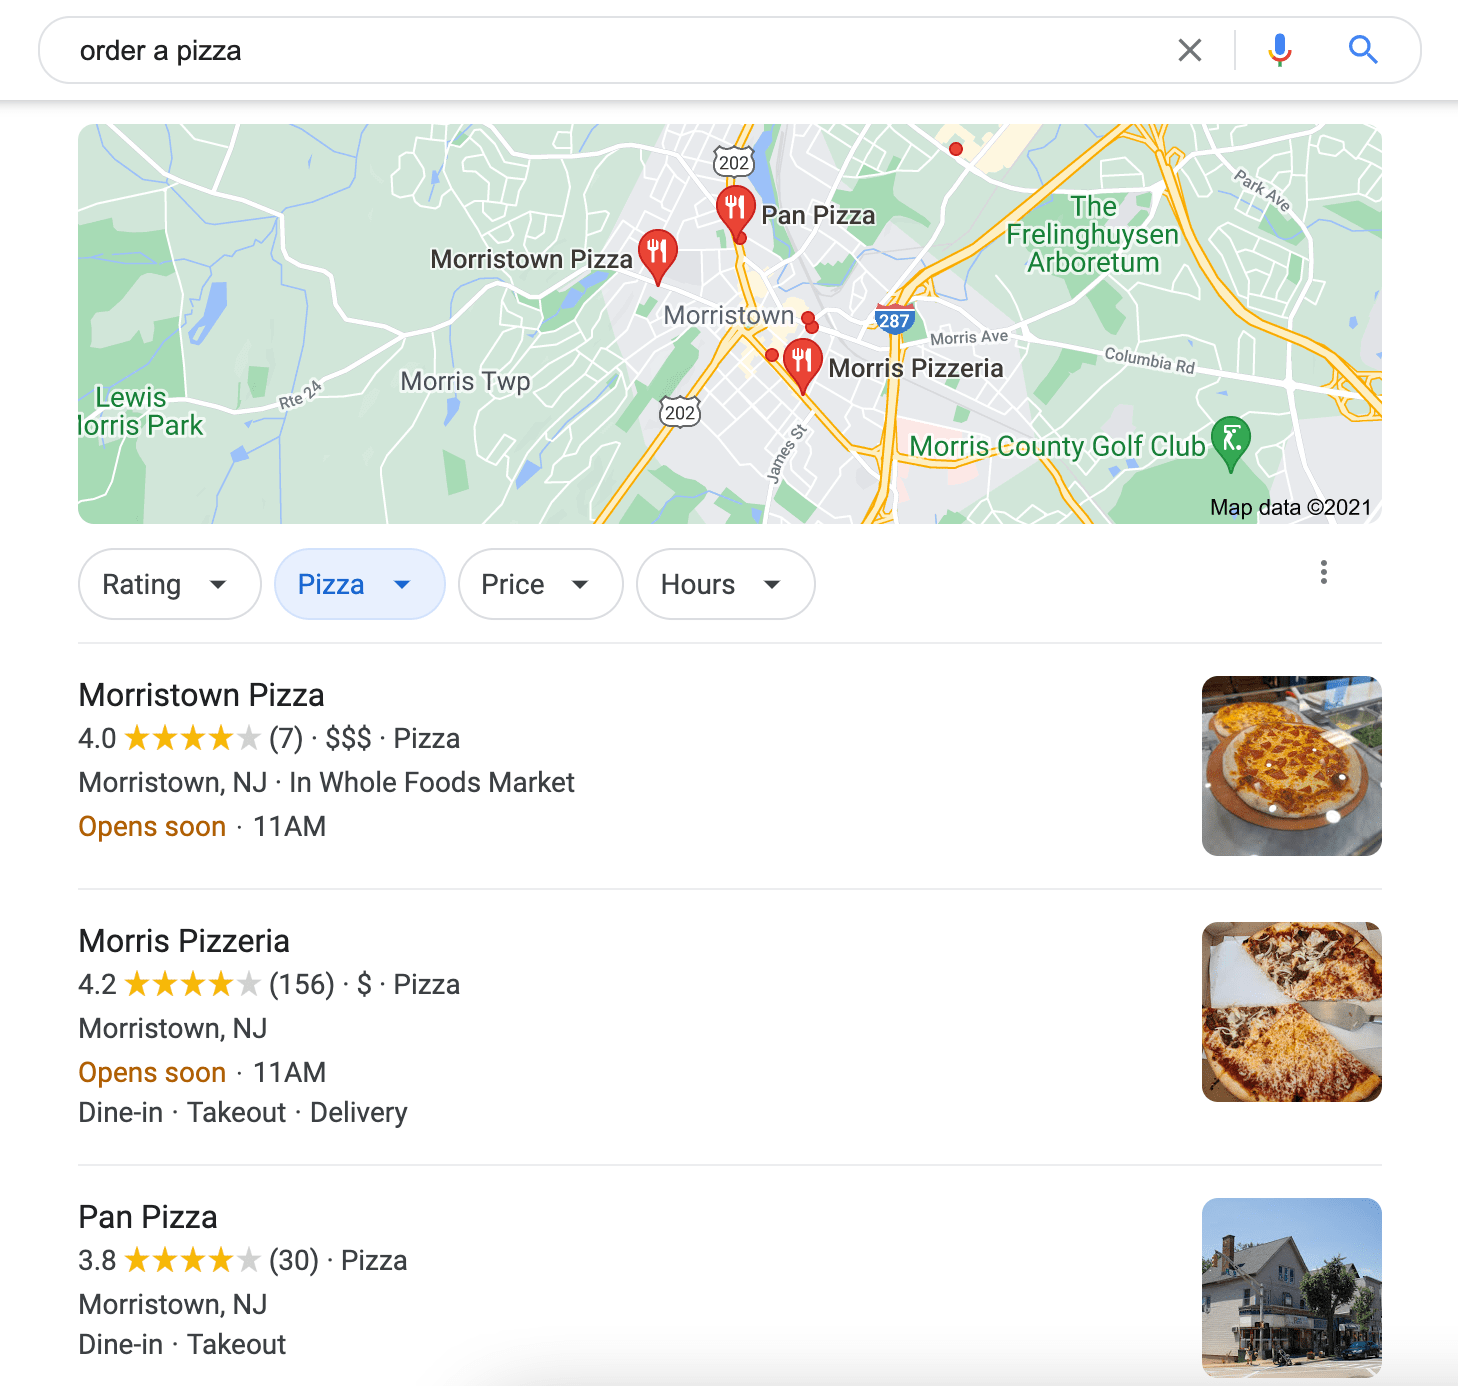 Display the local pizzeria to order pizza in the search query of the search term